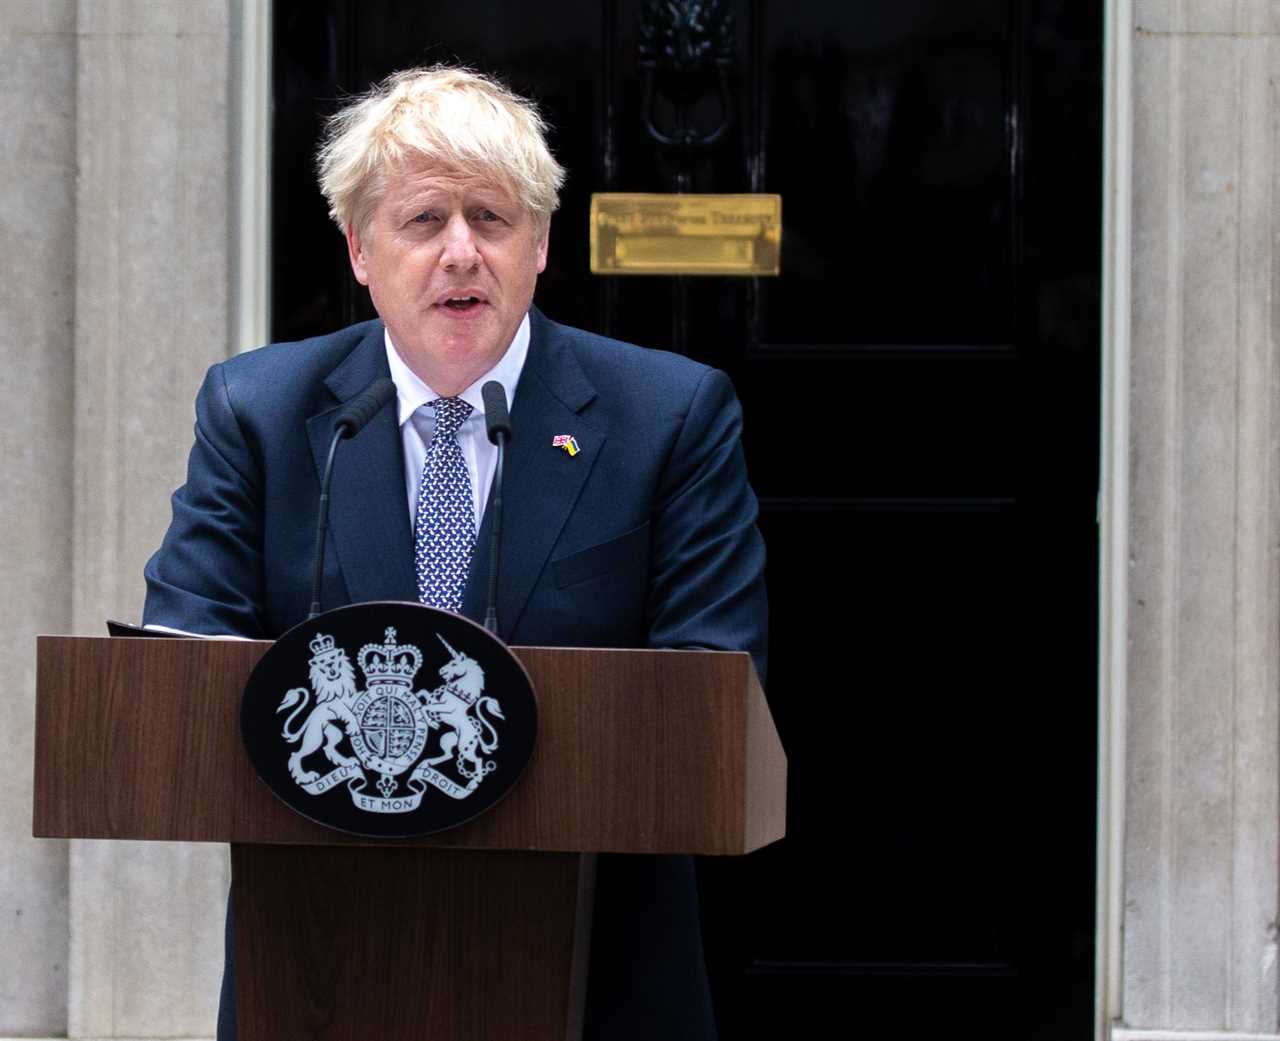 Boris Johnson tries to limp on until October with ‘zombie’ Cabinet – but top Tories demand he go NOW